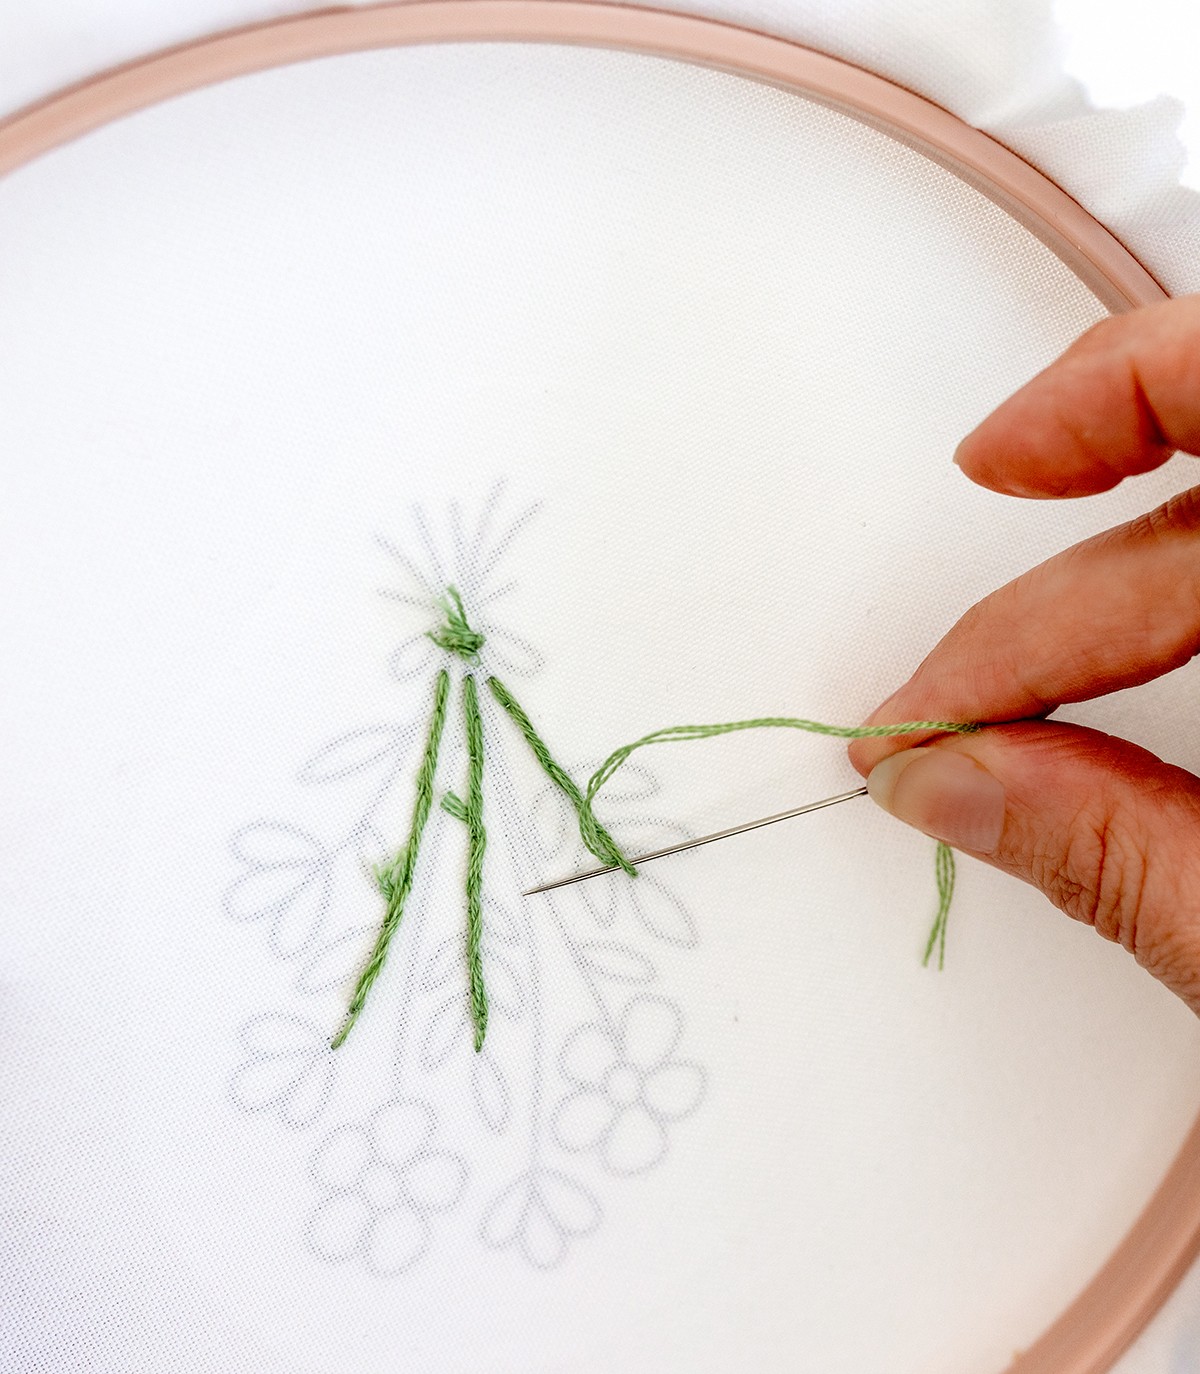 A needle is pushed under a stitch.